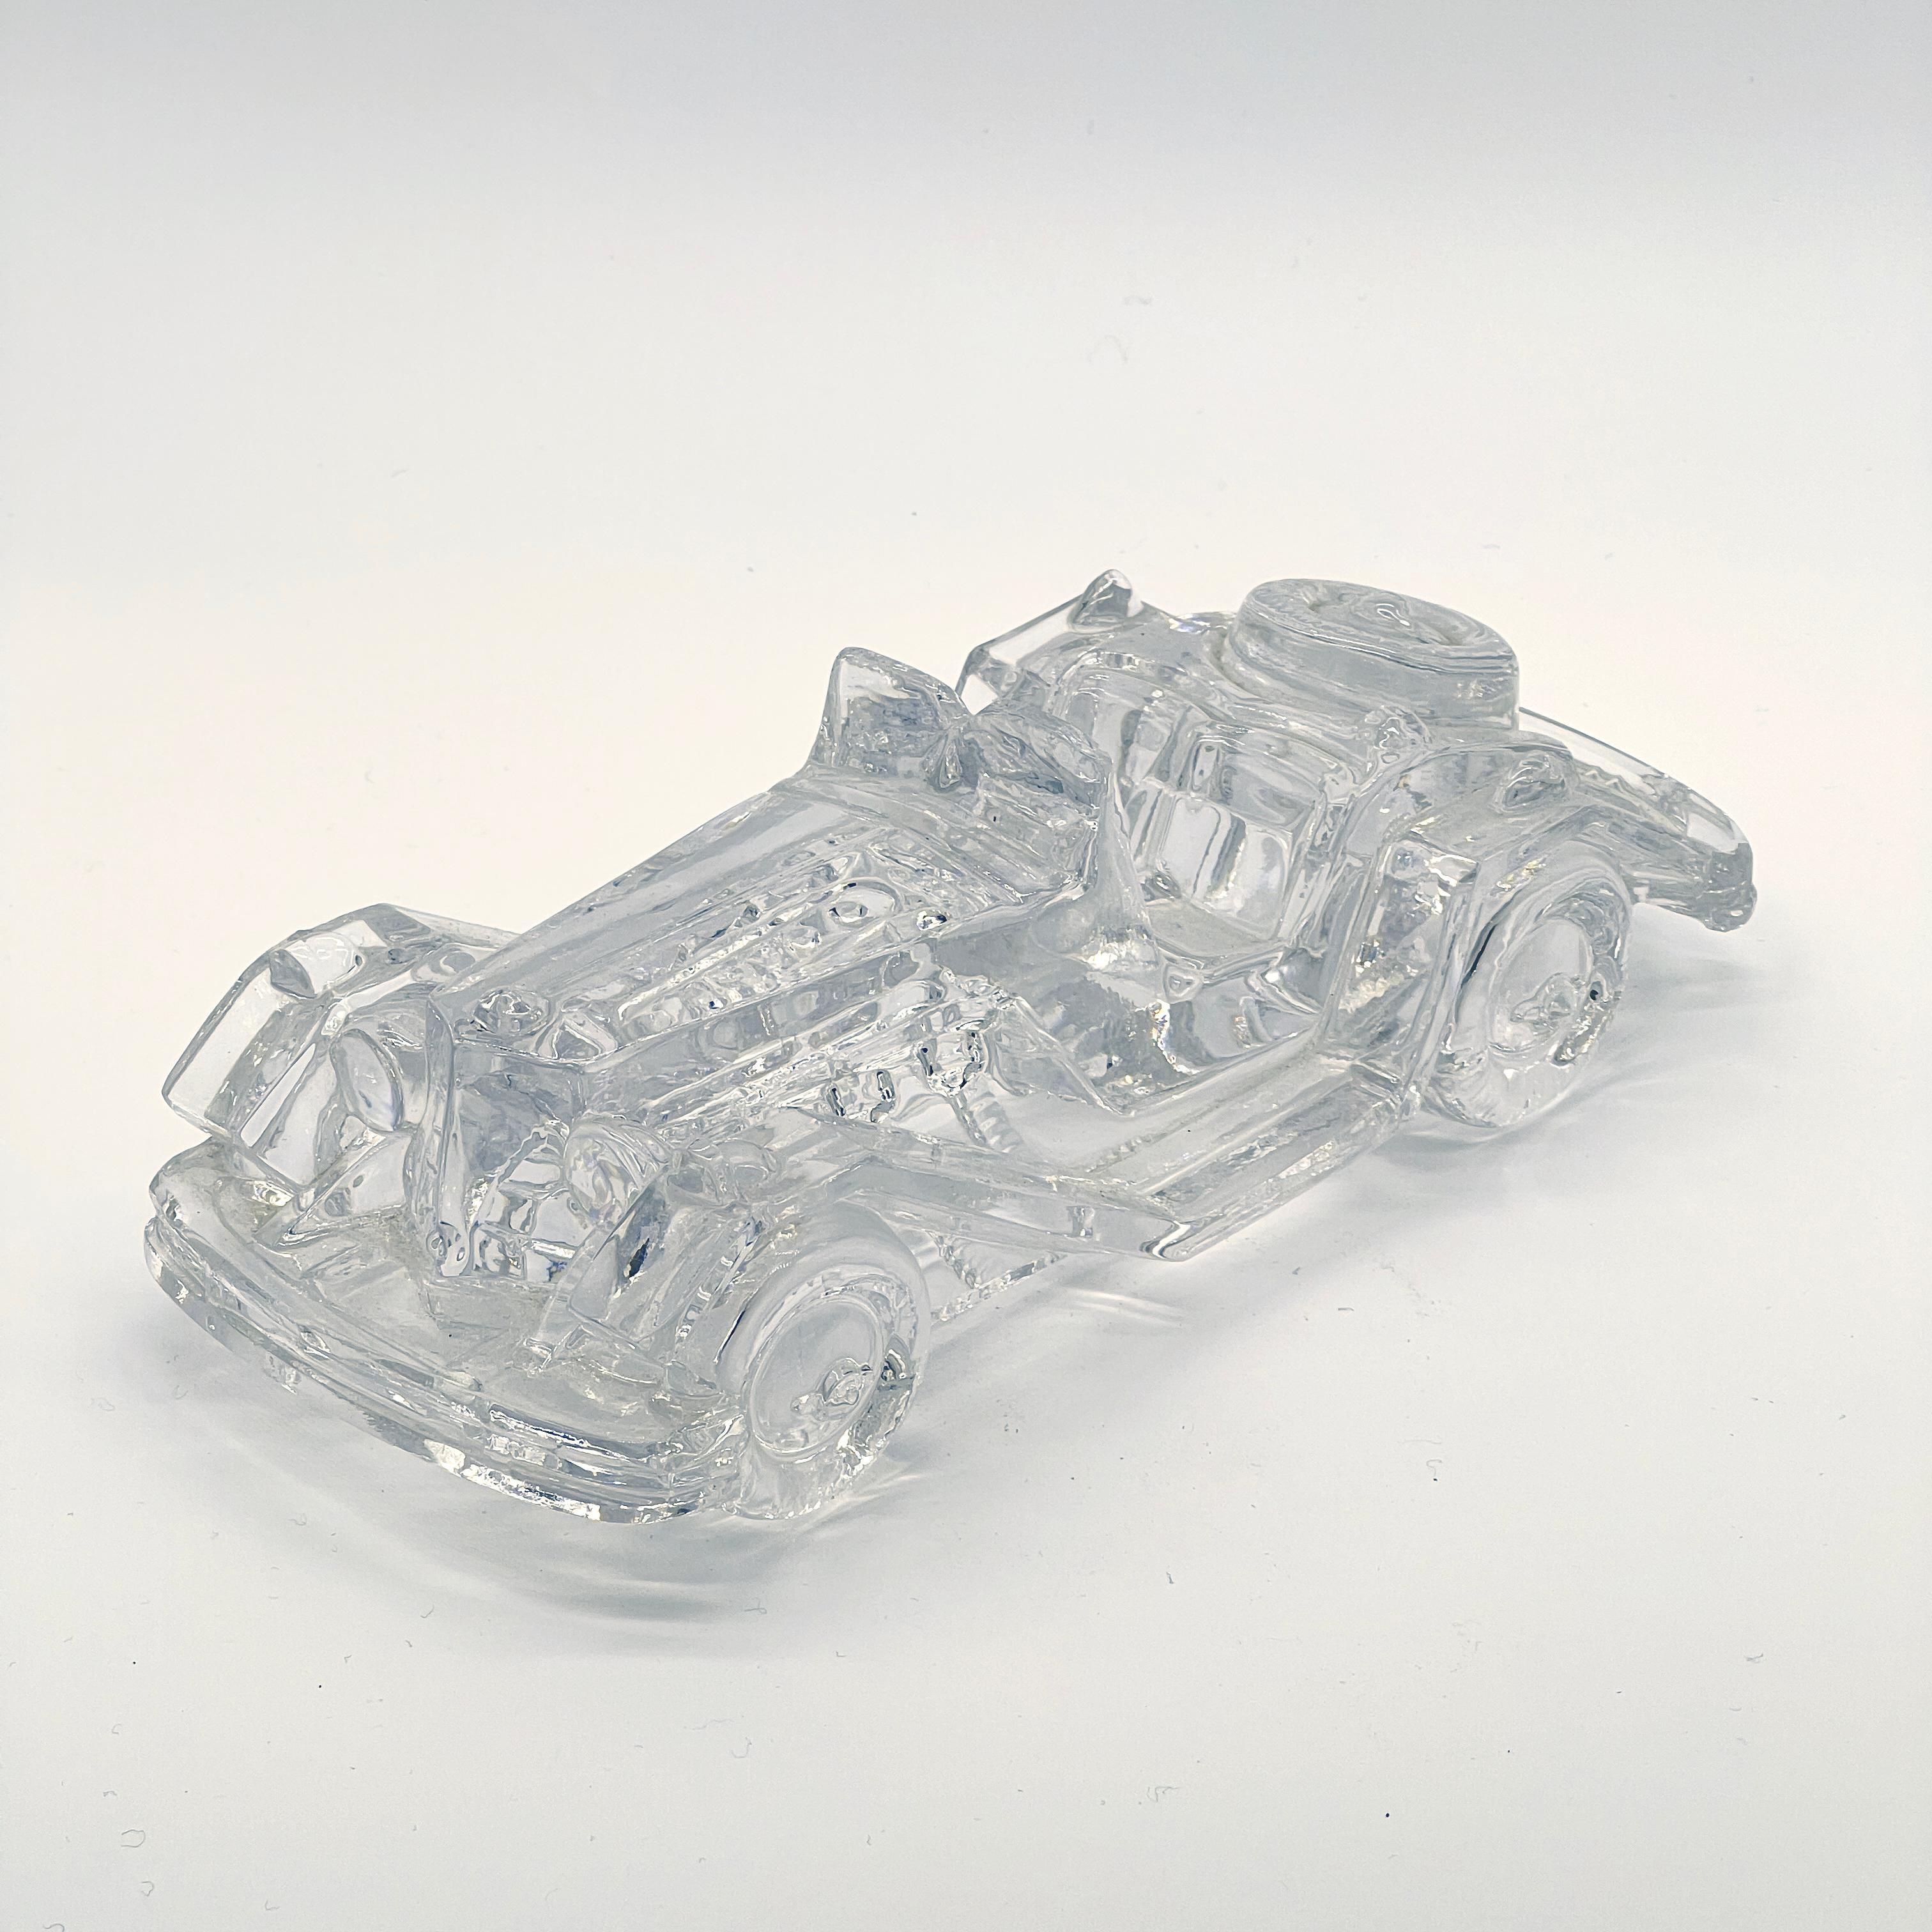 Vintage Clear Crystal Mg Roadster Decorative Model Car / Paperweight In Good Condition For Sale In Milan, IT